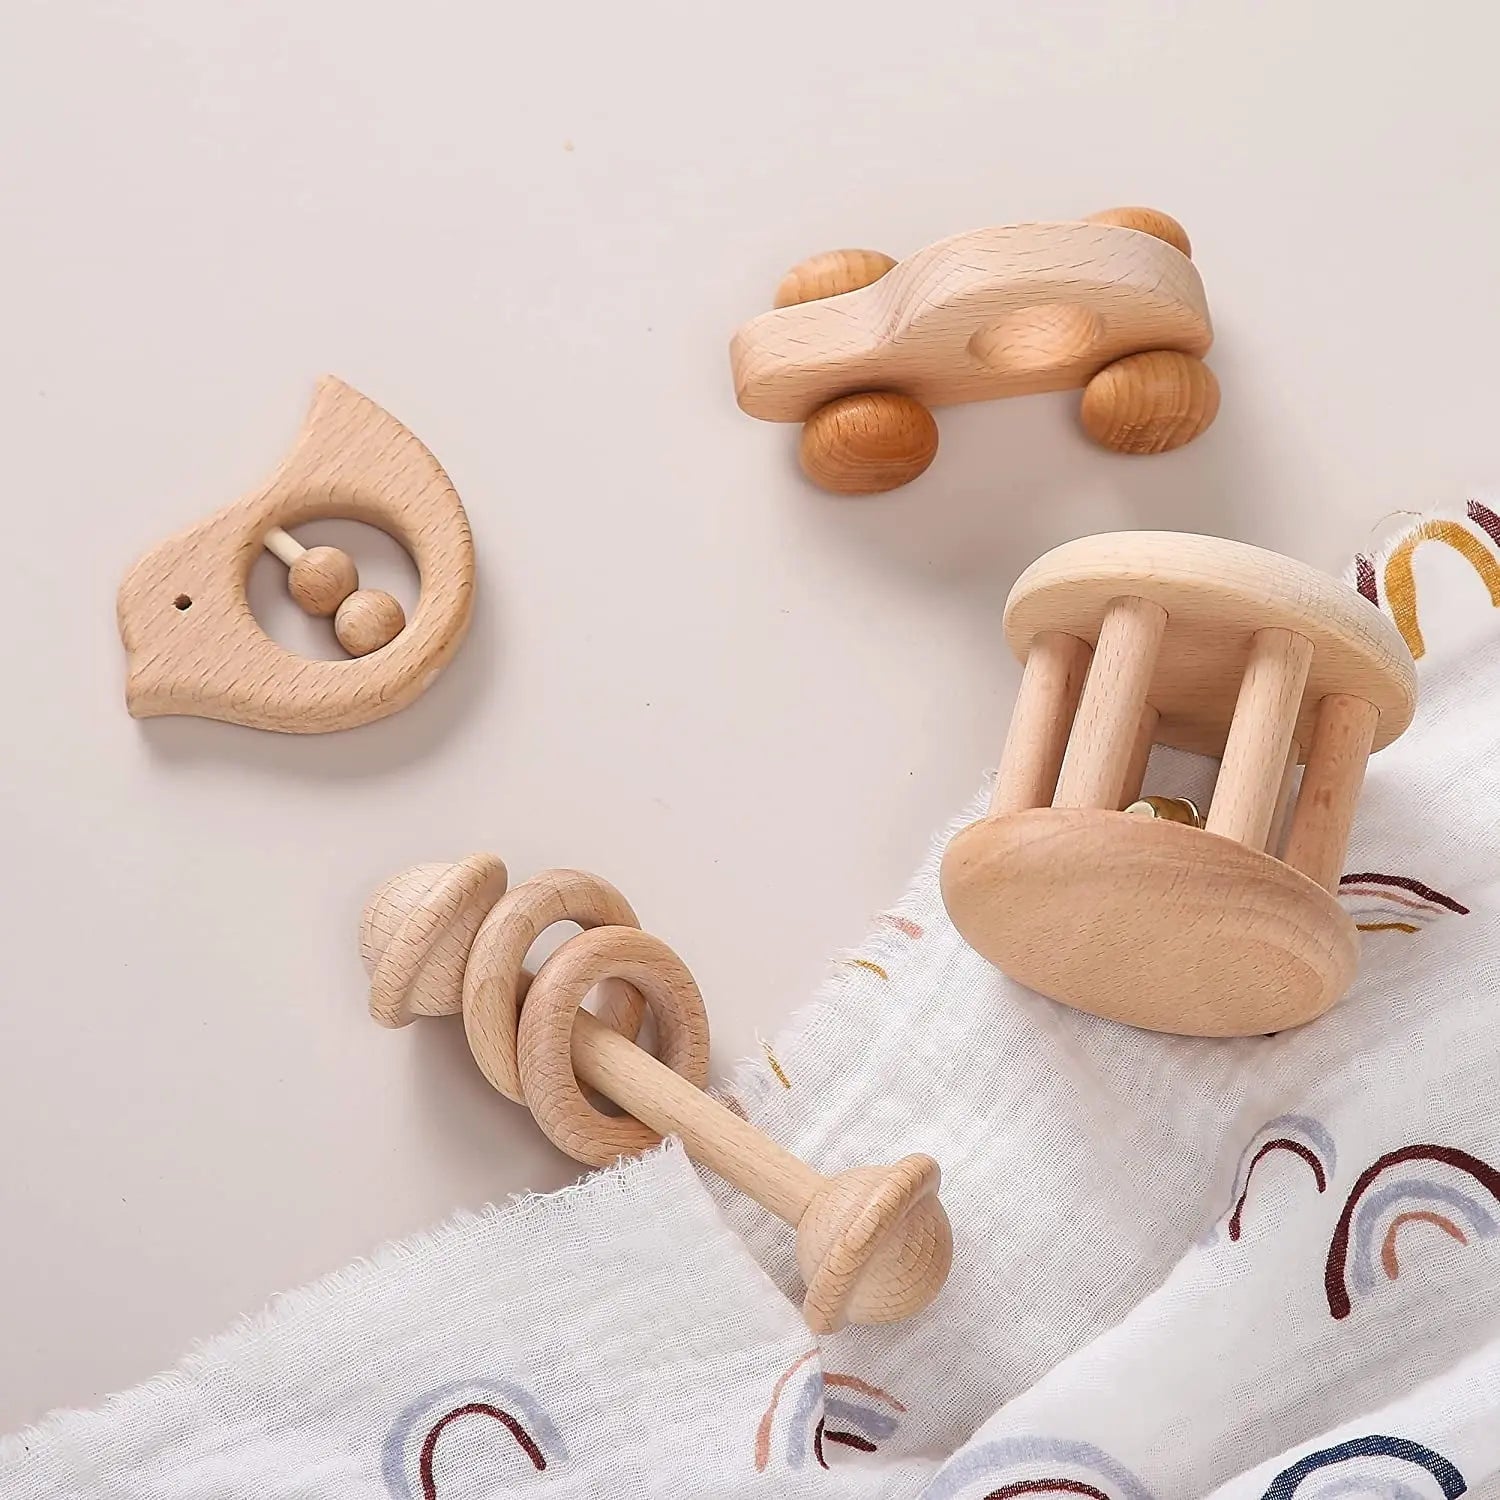 Wooden Baby Toys Wooden Rattle 4PC Handmade Natural Organic On Wooden